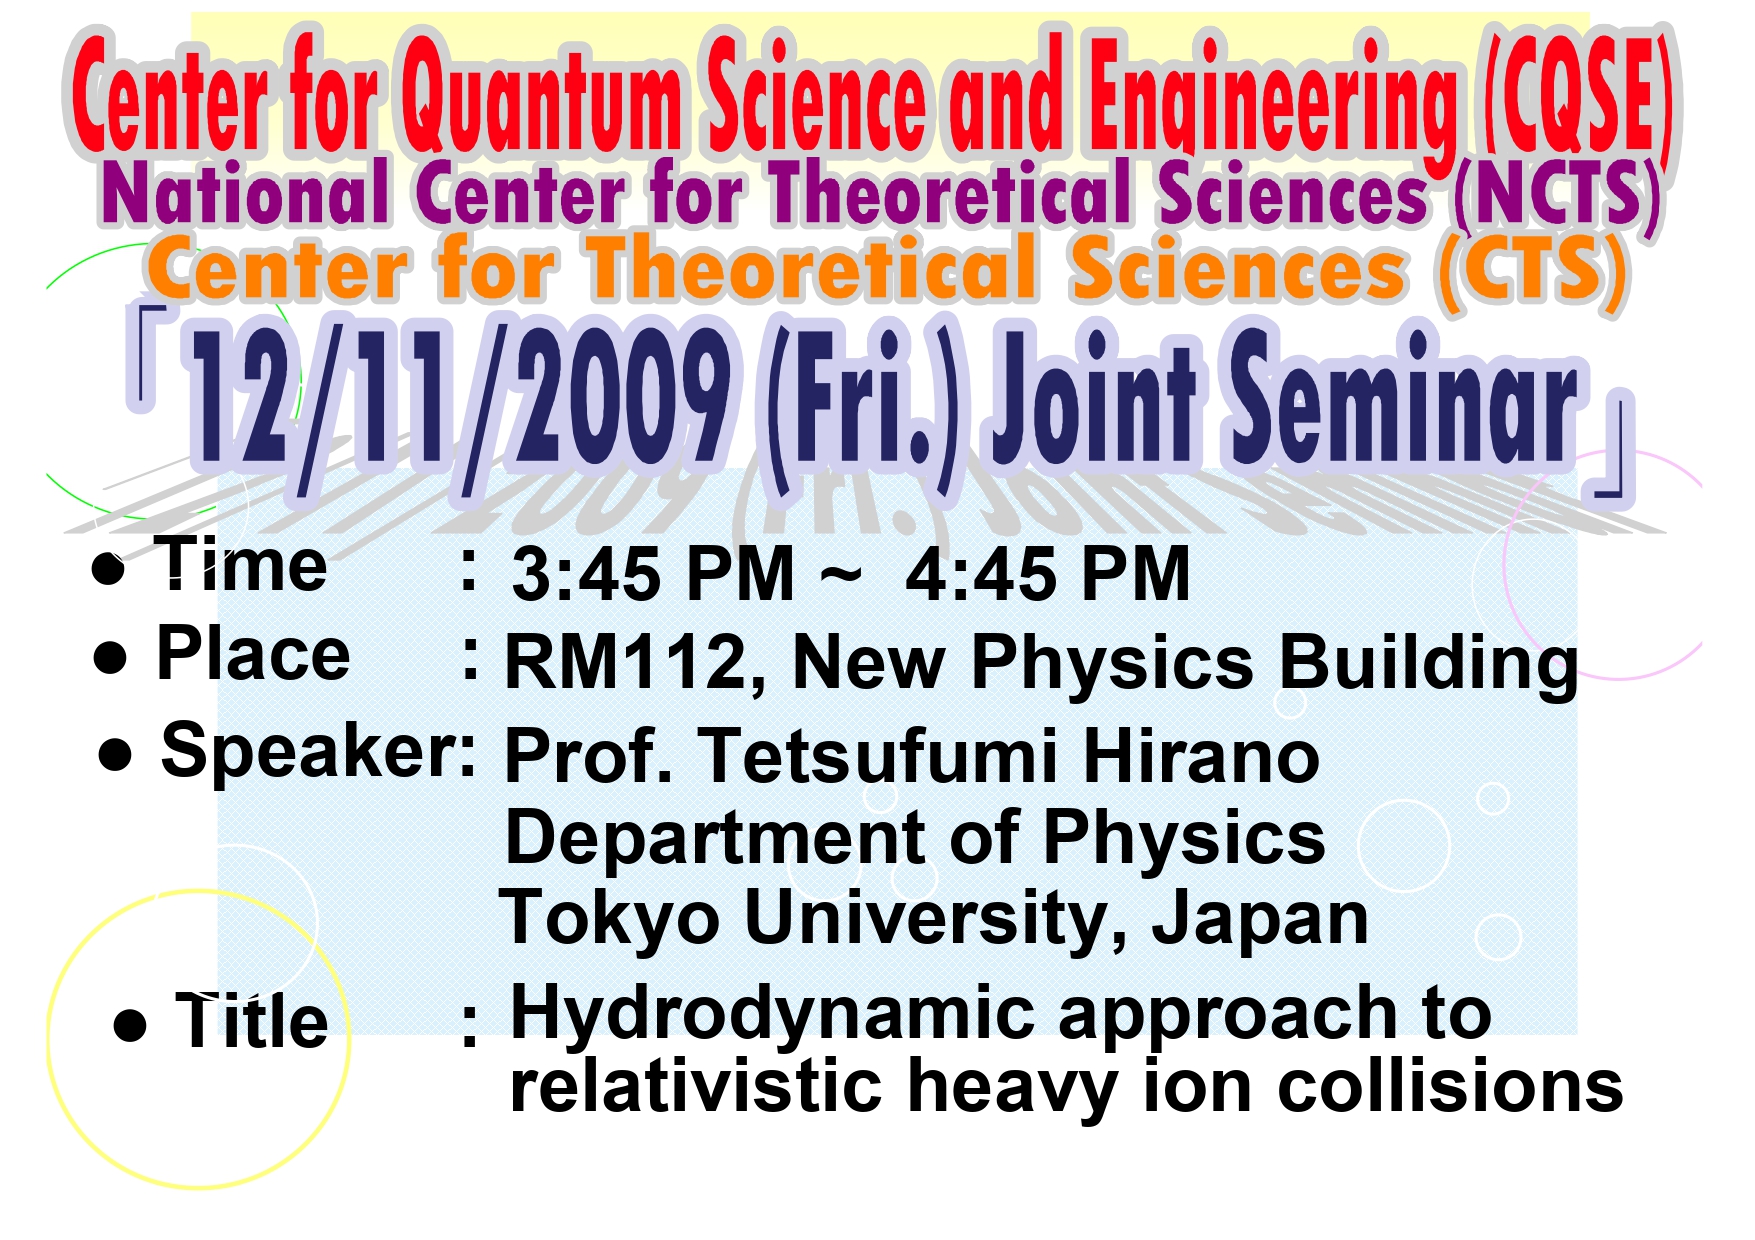 Special Seminars of Center for Quantum Science and Engineering (CQSE)